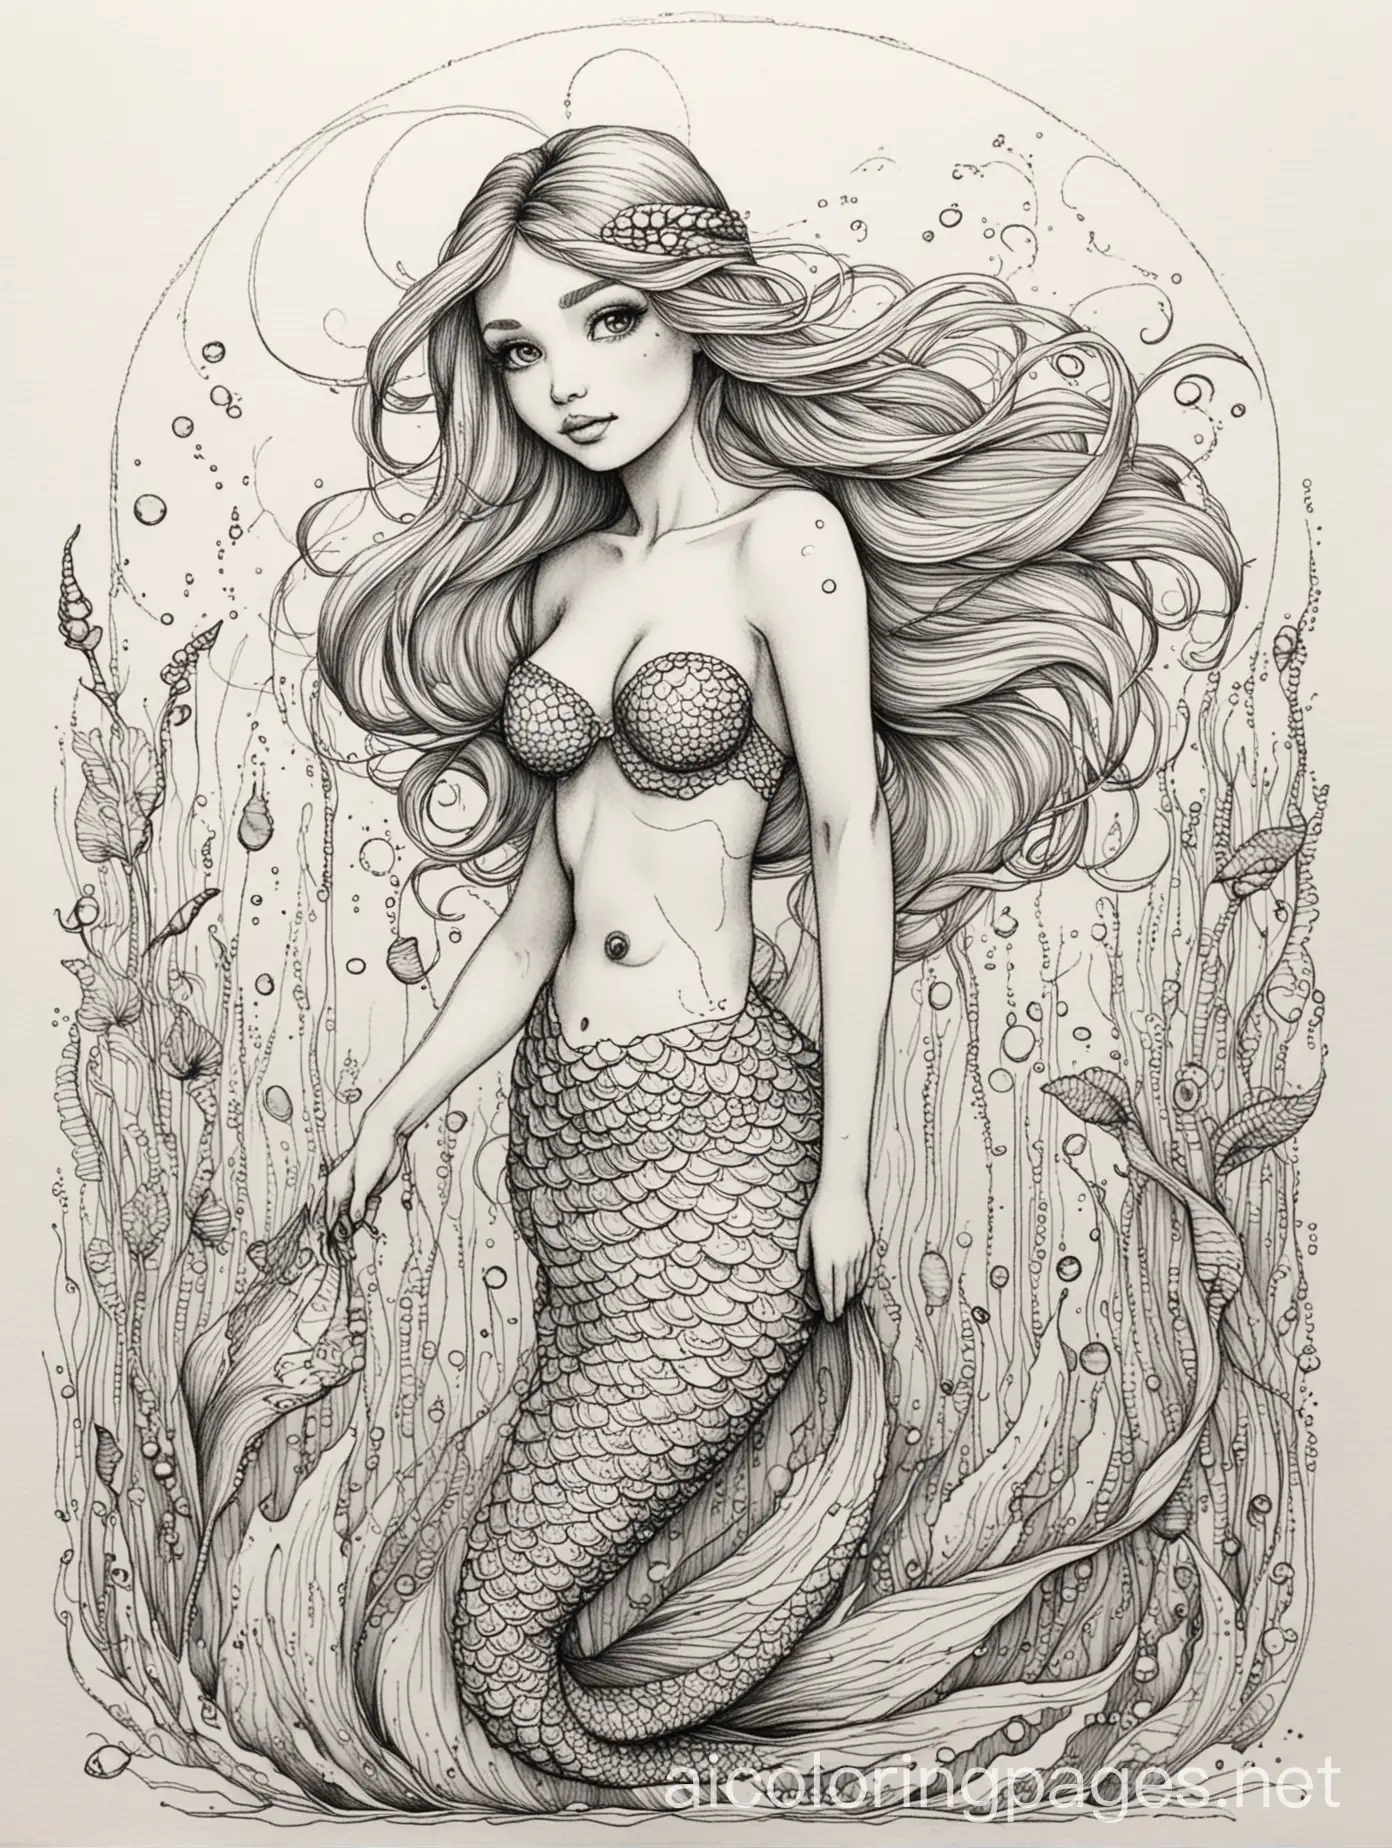 mermaid_pen_and_ink_and_watercolor_fine_art_masterpiece_g rated, Coloring Page, black and white, line art, white background, Simplicity, Ample White Space. The background of the coloring page is plain white to make it easy for young children to color within the lines. The outlines of all the subjects are easy to distinguish, making it simple for kids to color without too much difficulty